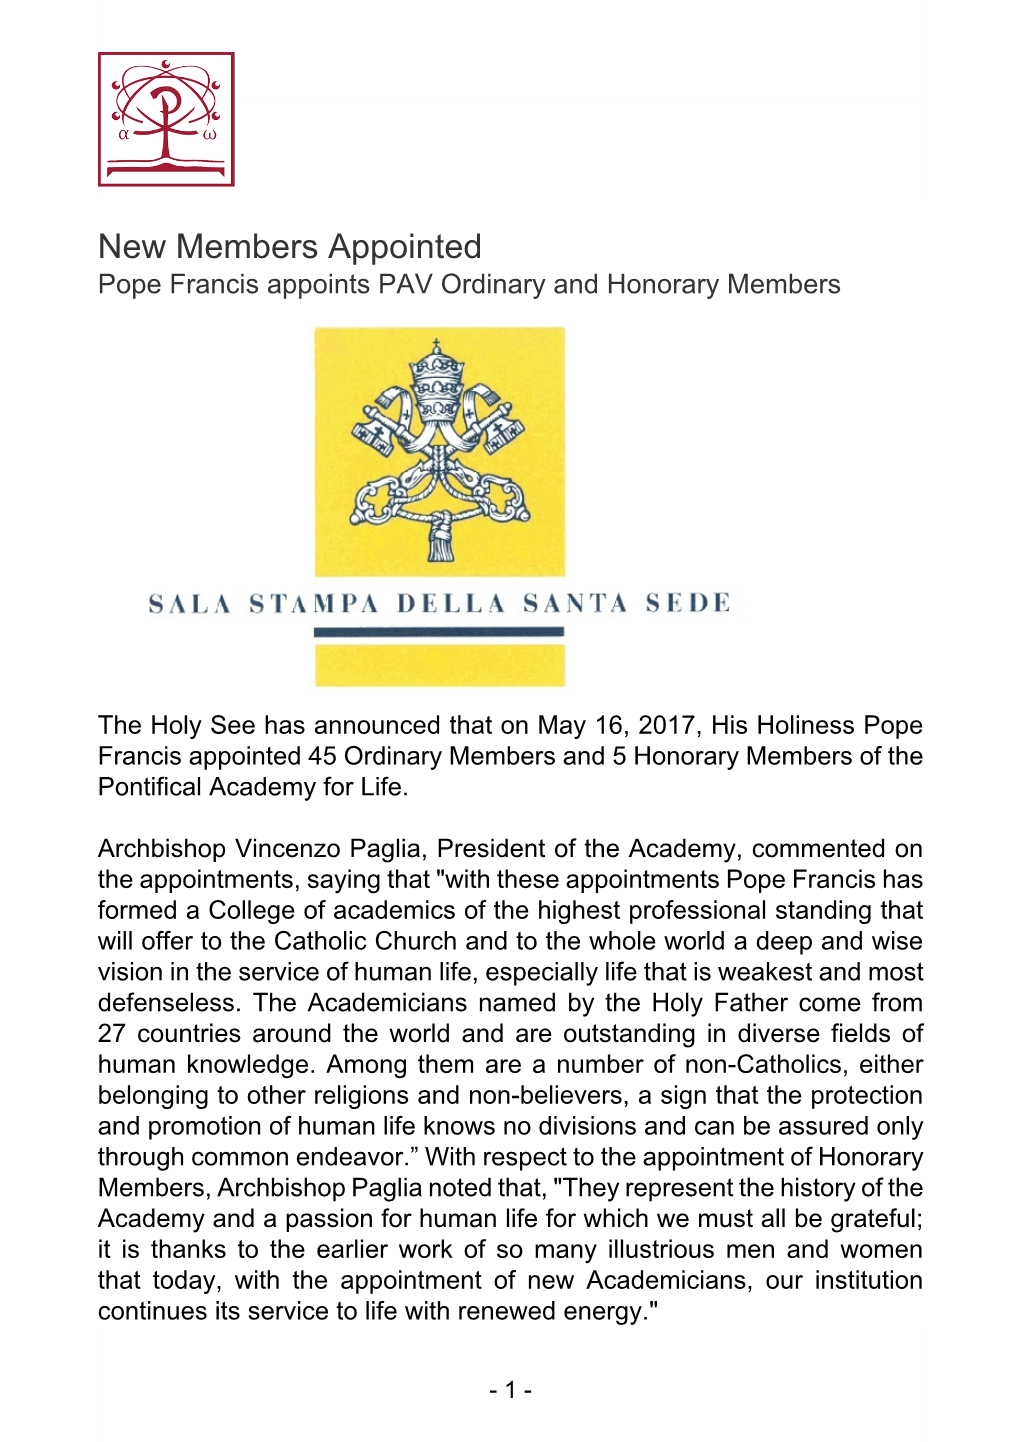 New Members Appointed Pope Francis Appoints PAV Ordinary and Honorary Members